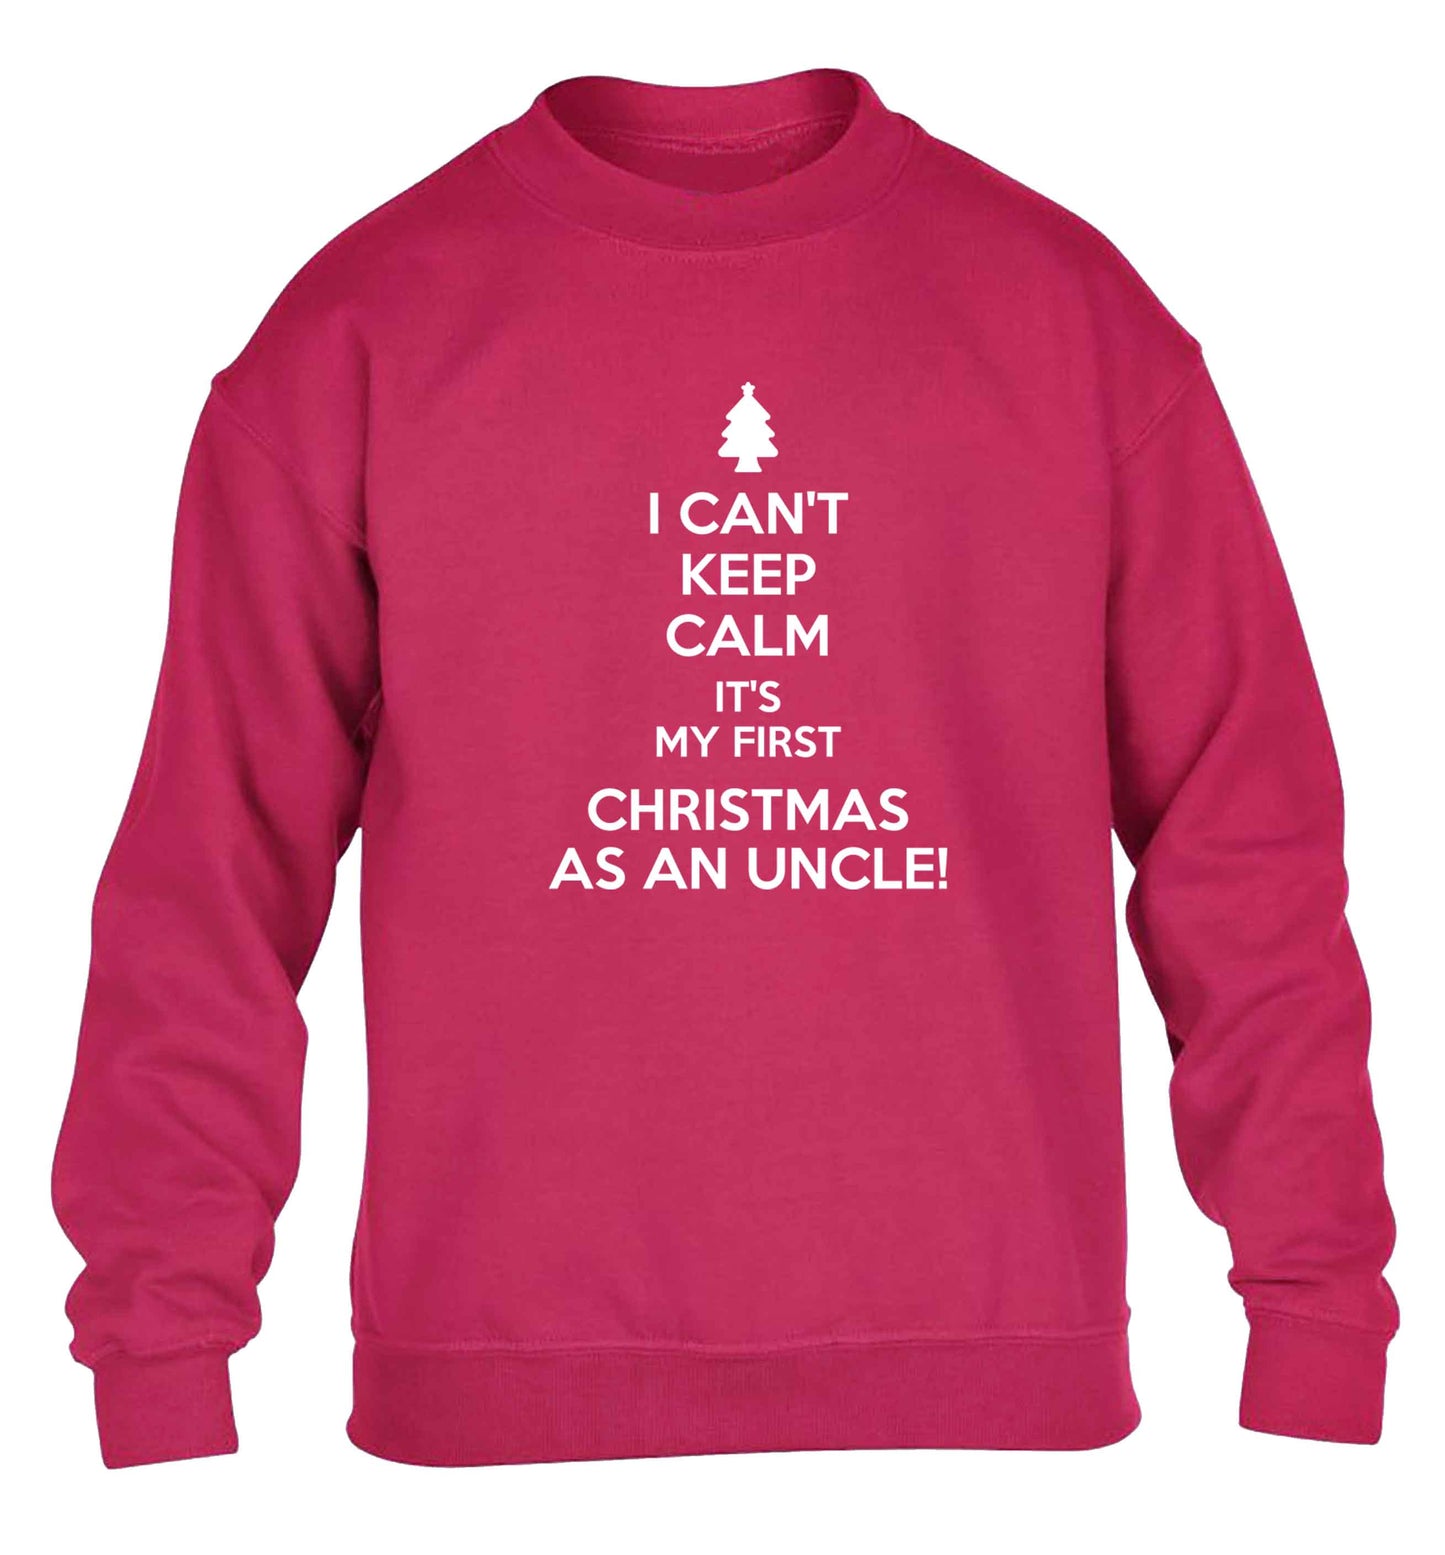 I can't keep calm it's my first Christmas as an uncle! children's pink sweater 12-13 Years